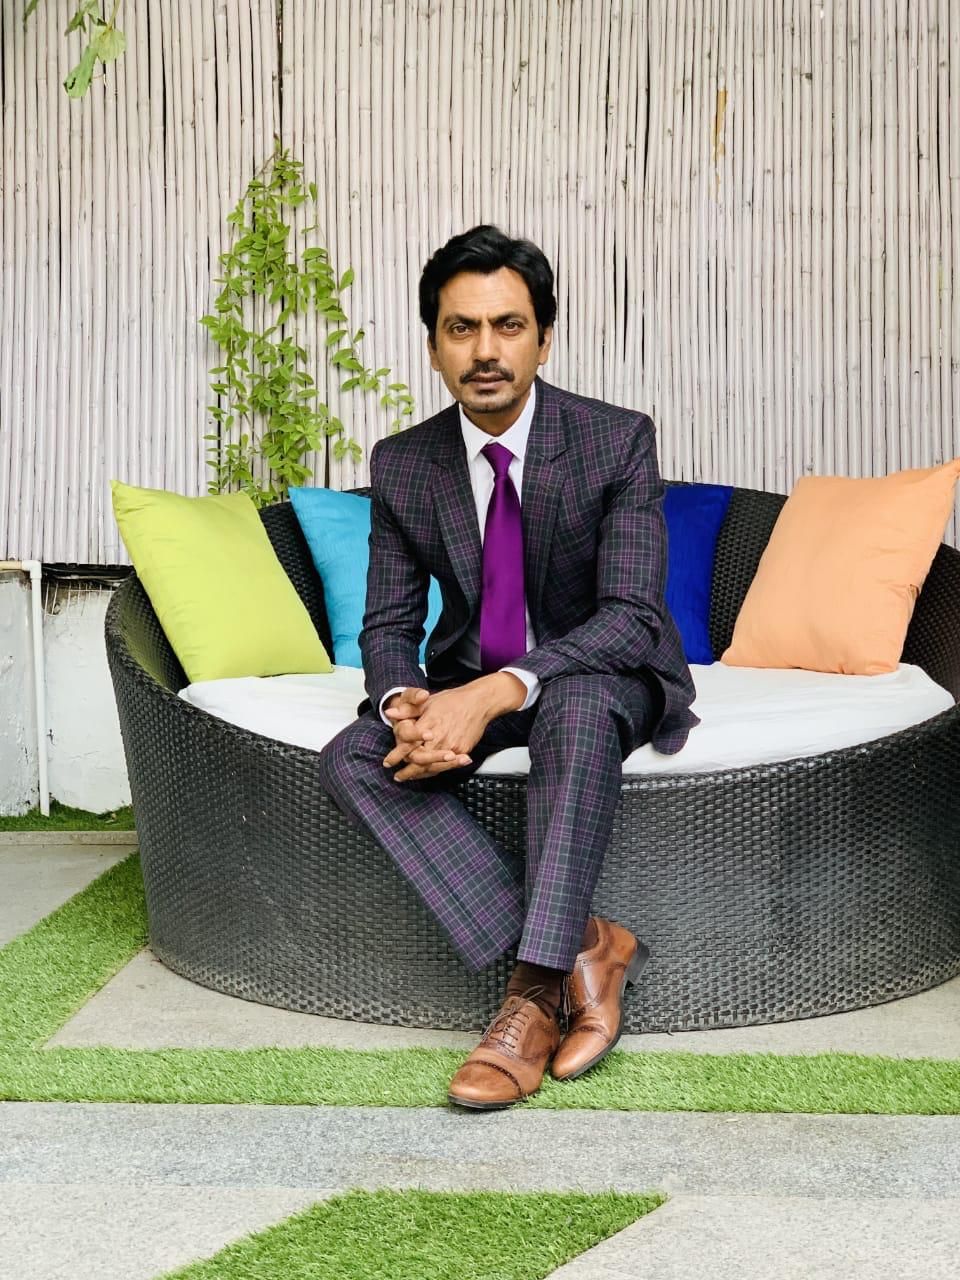 Nawazuddin Siddiqui Lashes Out At Celebs Sharing Vacay Pictures In These Trying Times, Says "Kuch Toh Sharm Karo"